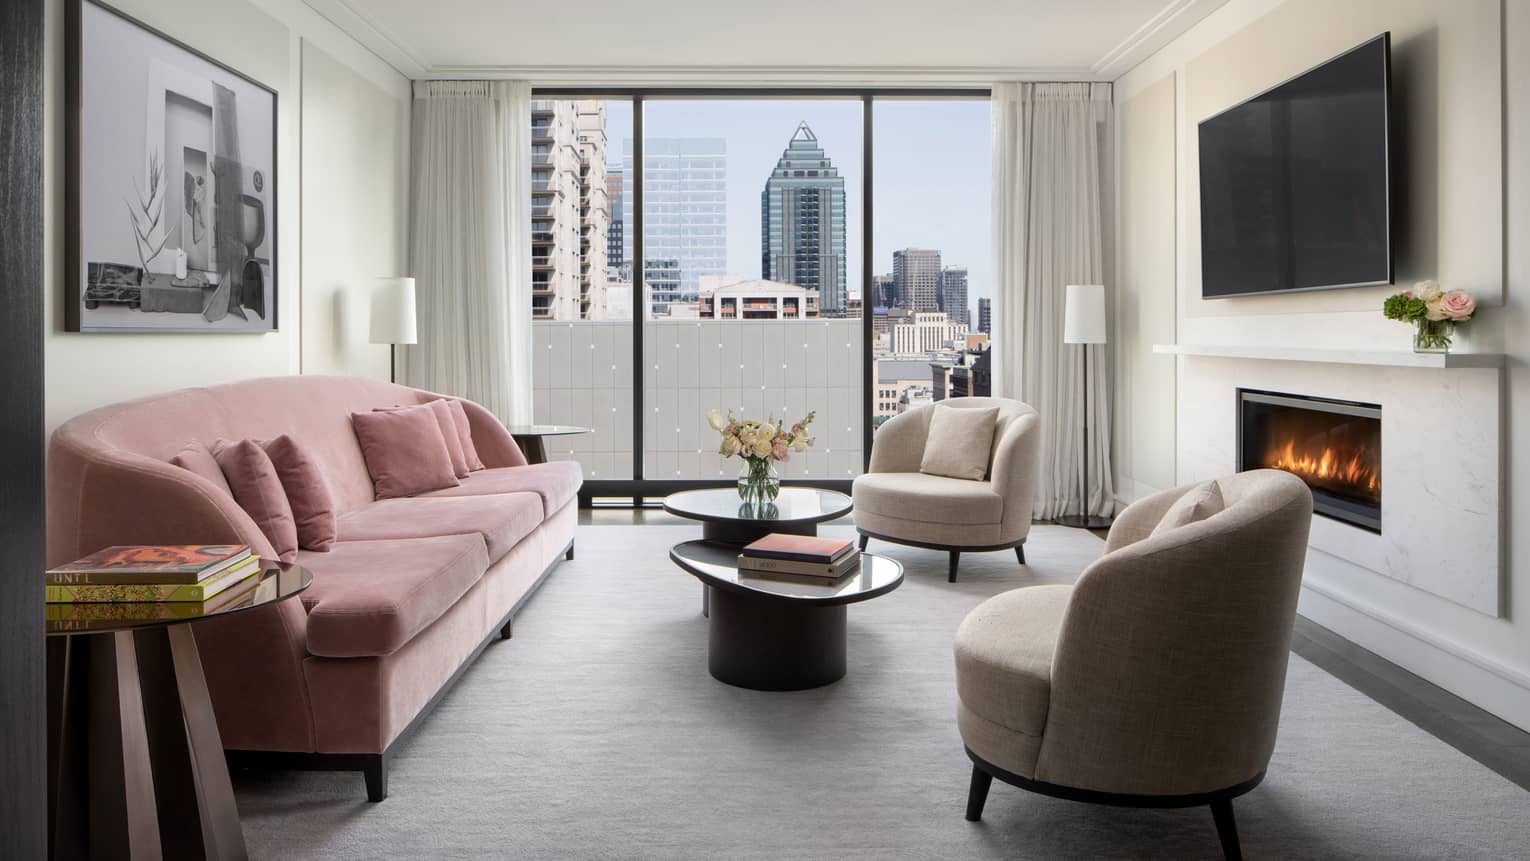 Hotel living room with pink velvet sofa, two arm chairs, fireplace, TV and city view